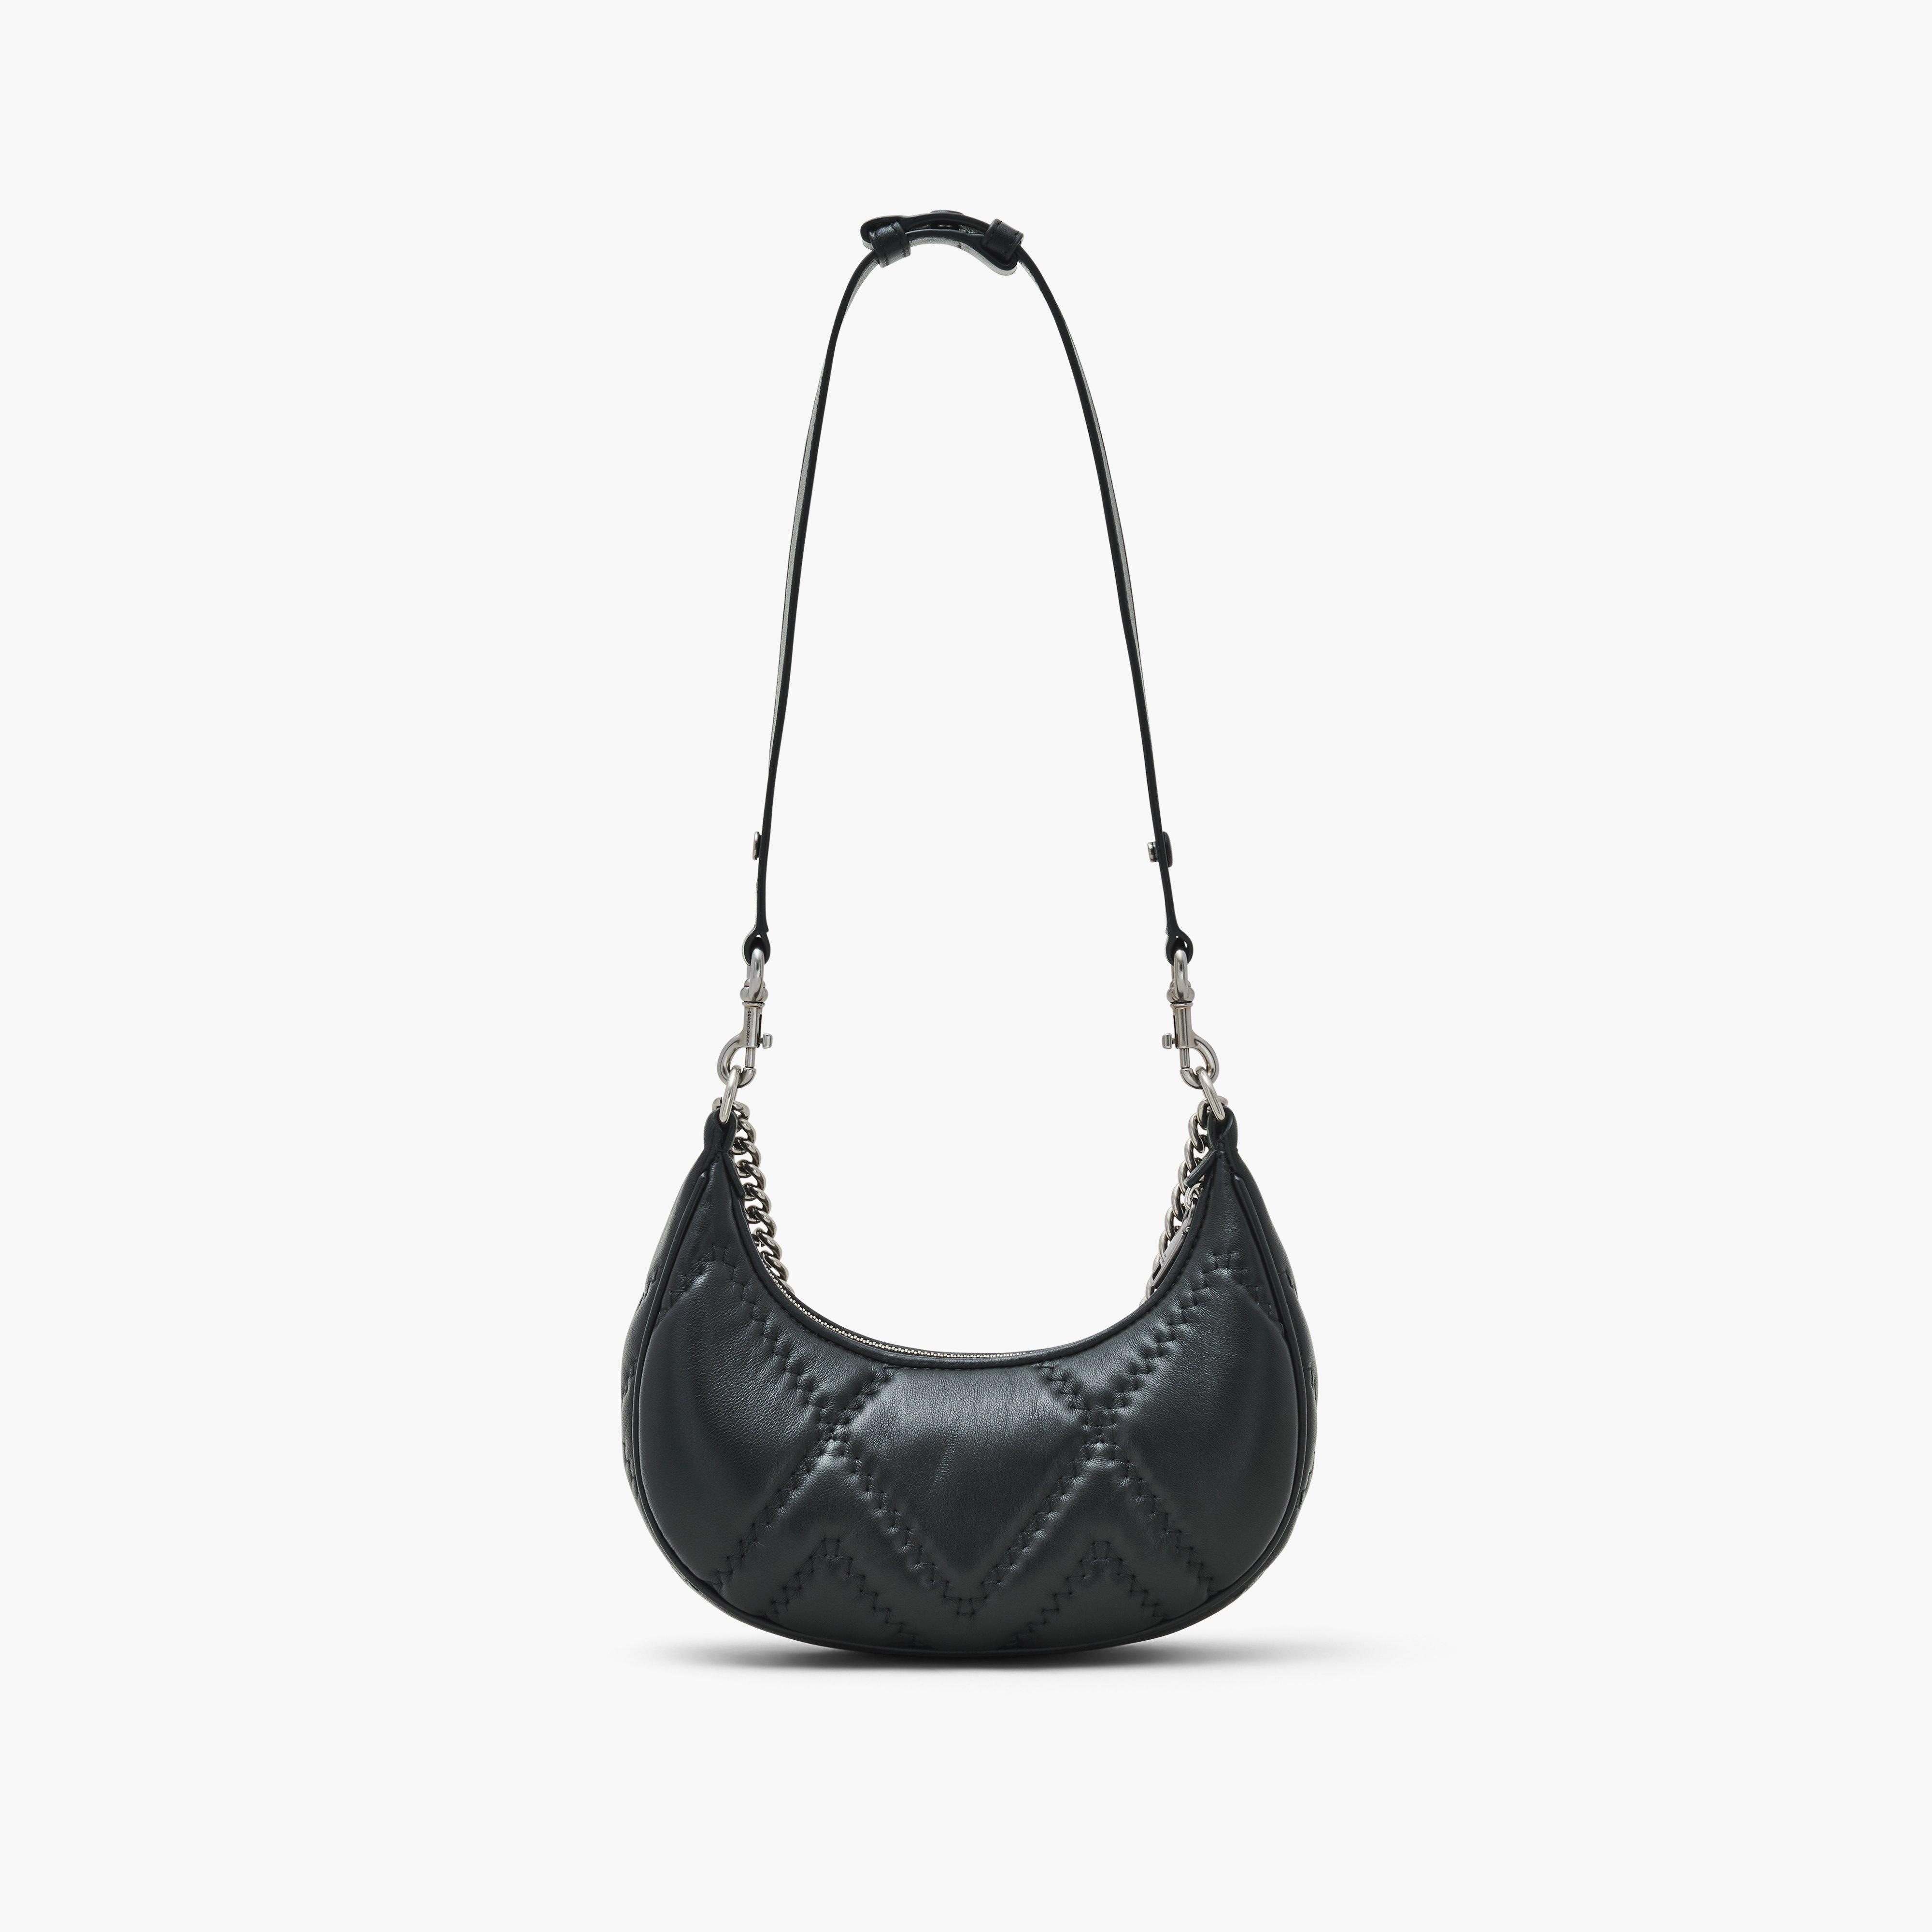 THE QUILTED LEATHER J MARC CURVE BAG - 4